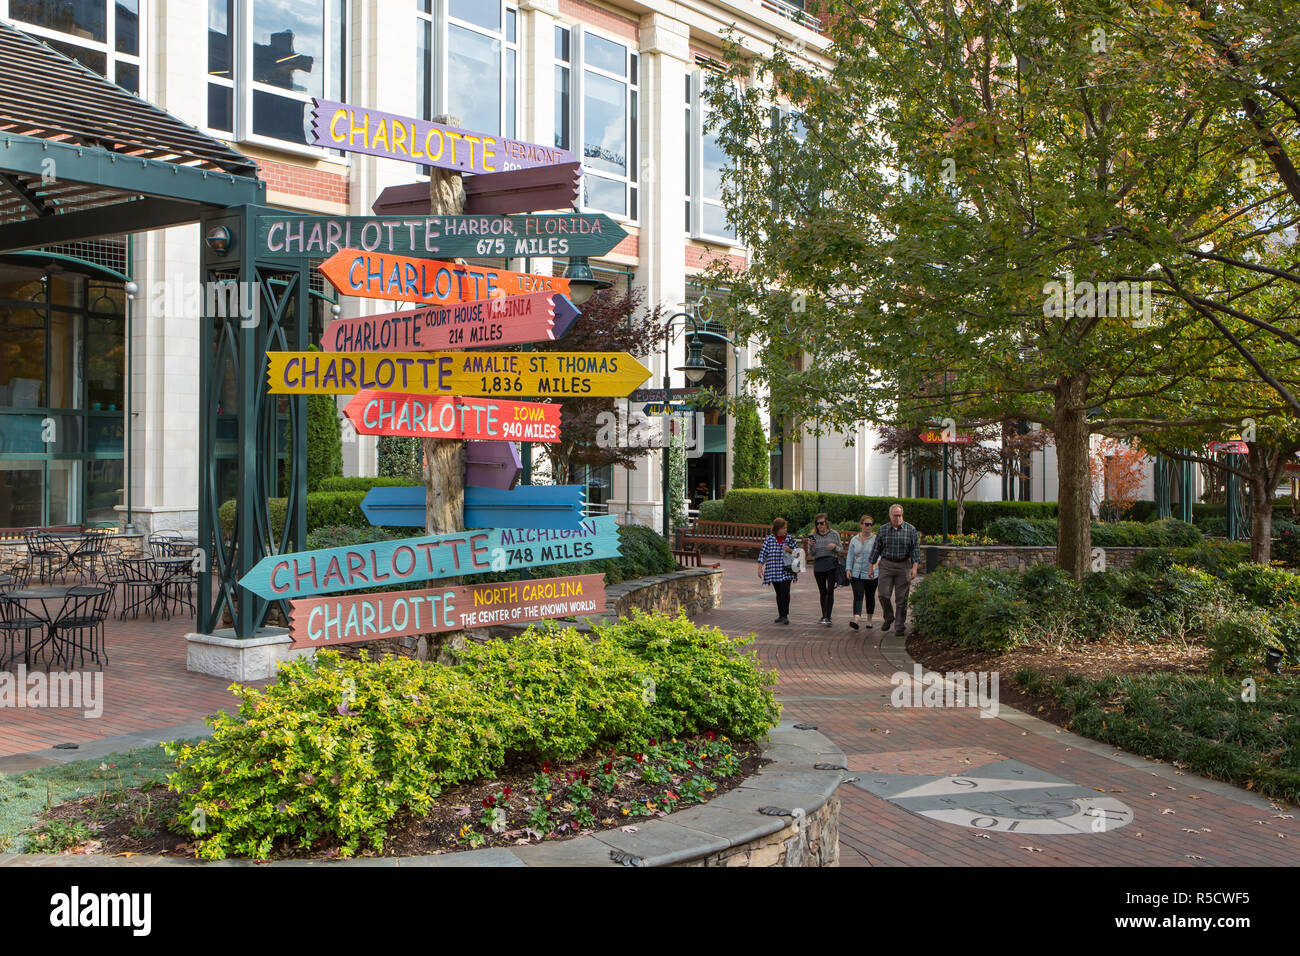 CHARLOTTE, NC - November 25, 2016:  Humorous directional signs along a path in The Green, an urban park in uptown Charlotte, North Carolina. Stock Photo